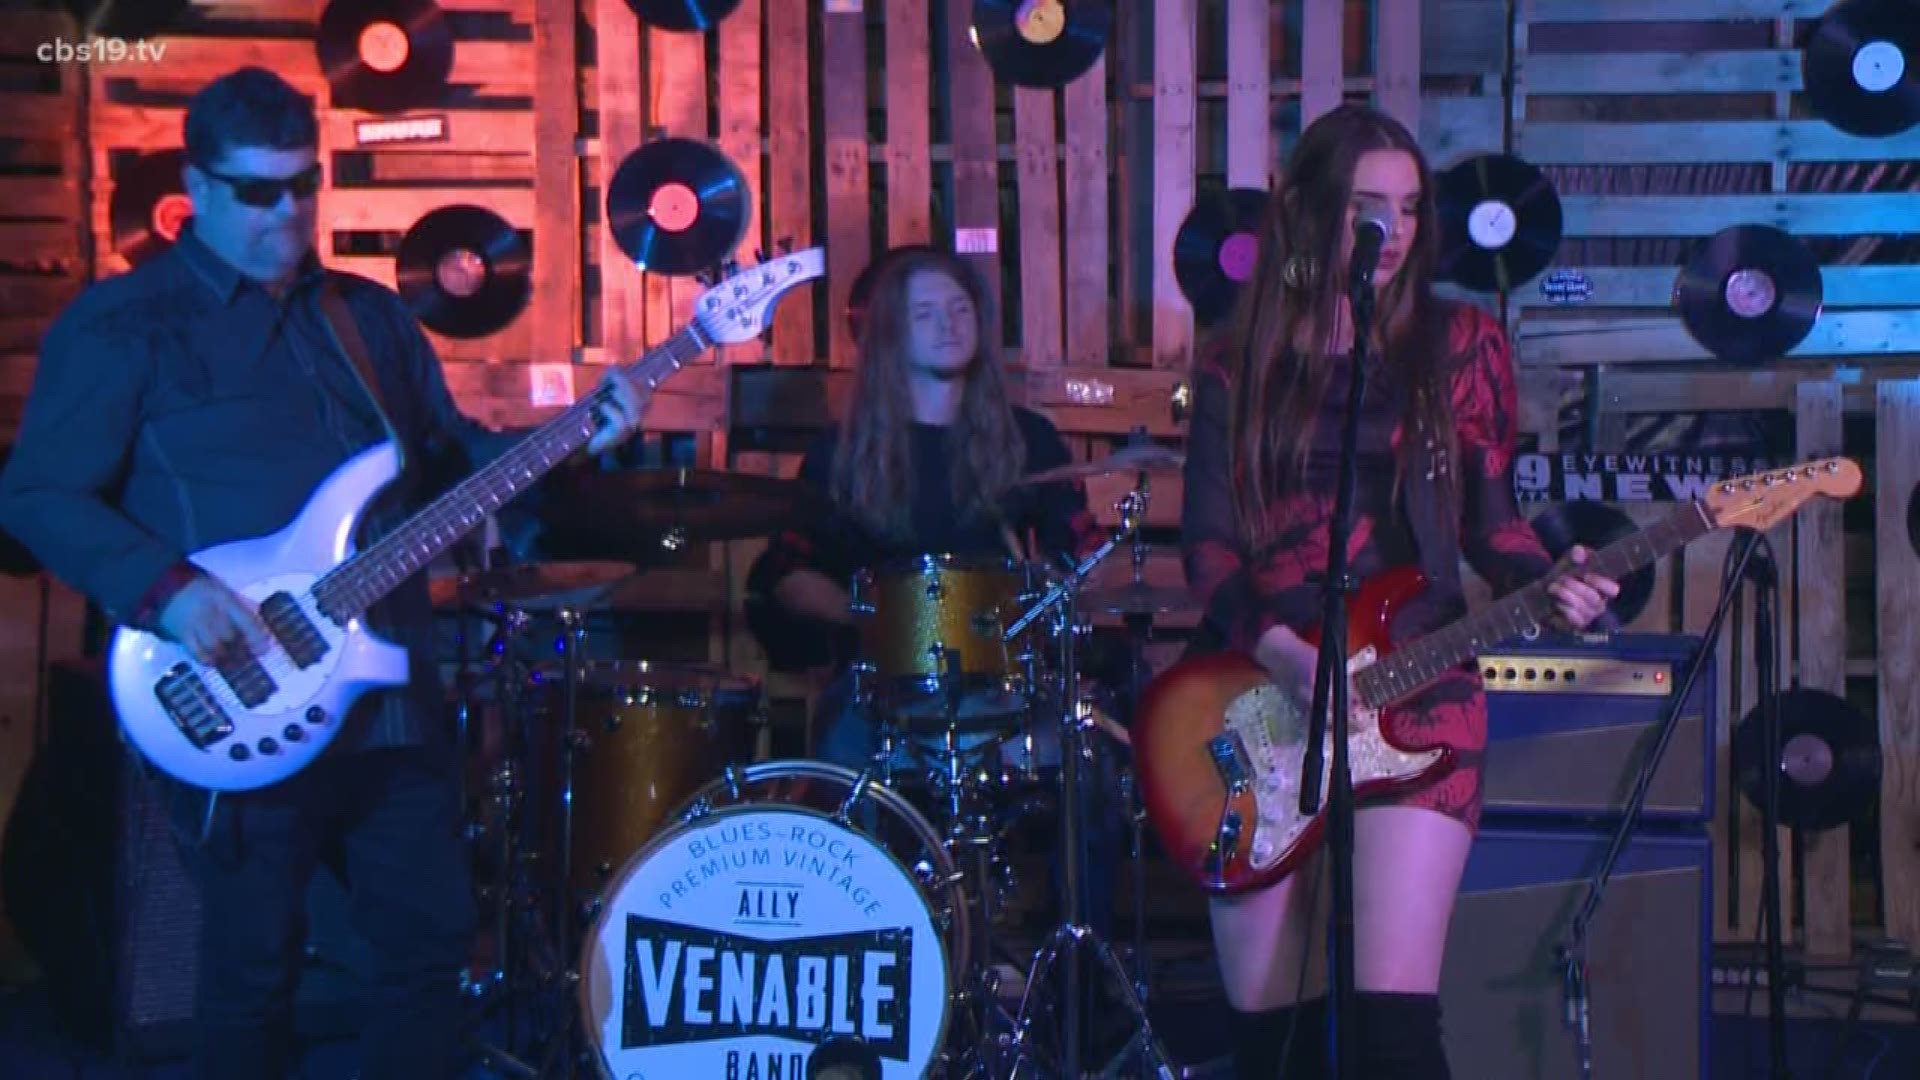 The Ally Venable Band returns to the CBS19 stage.